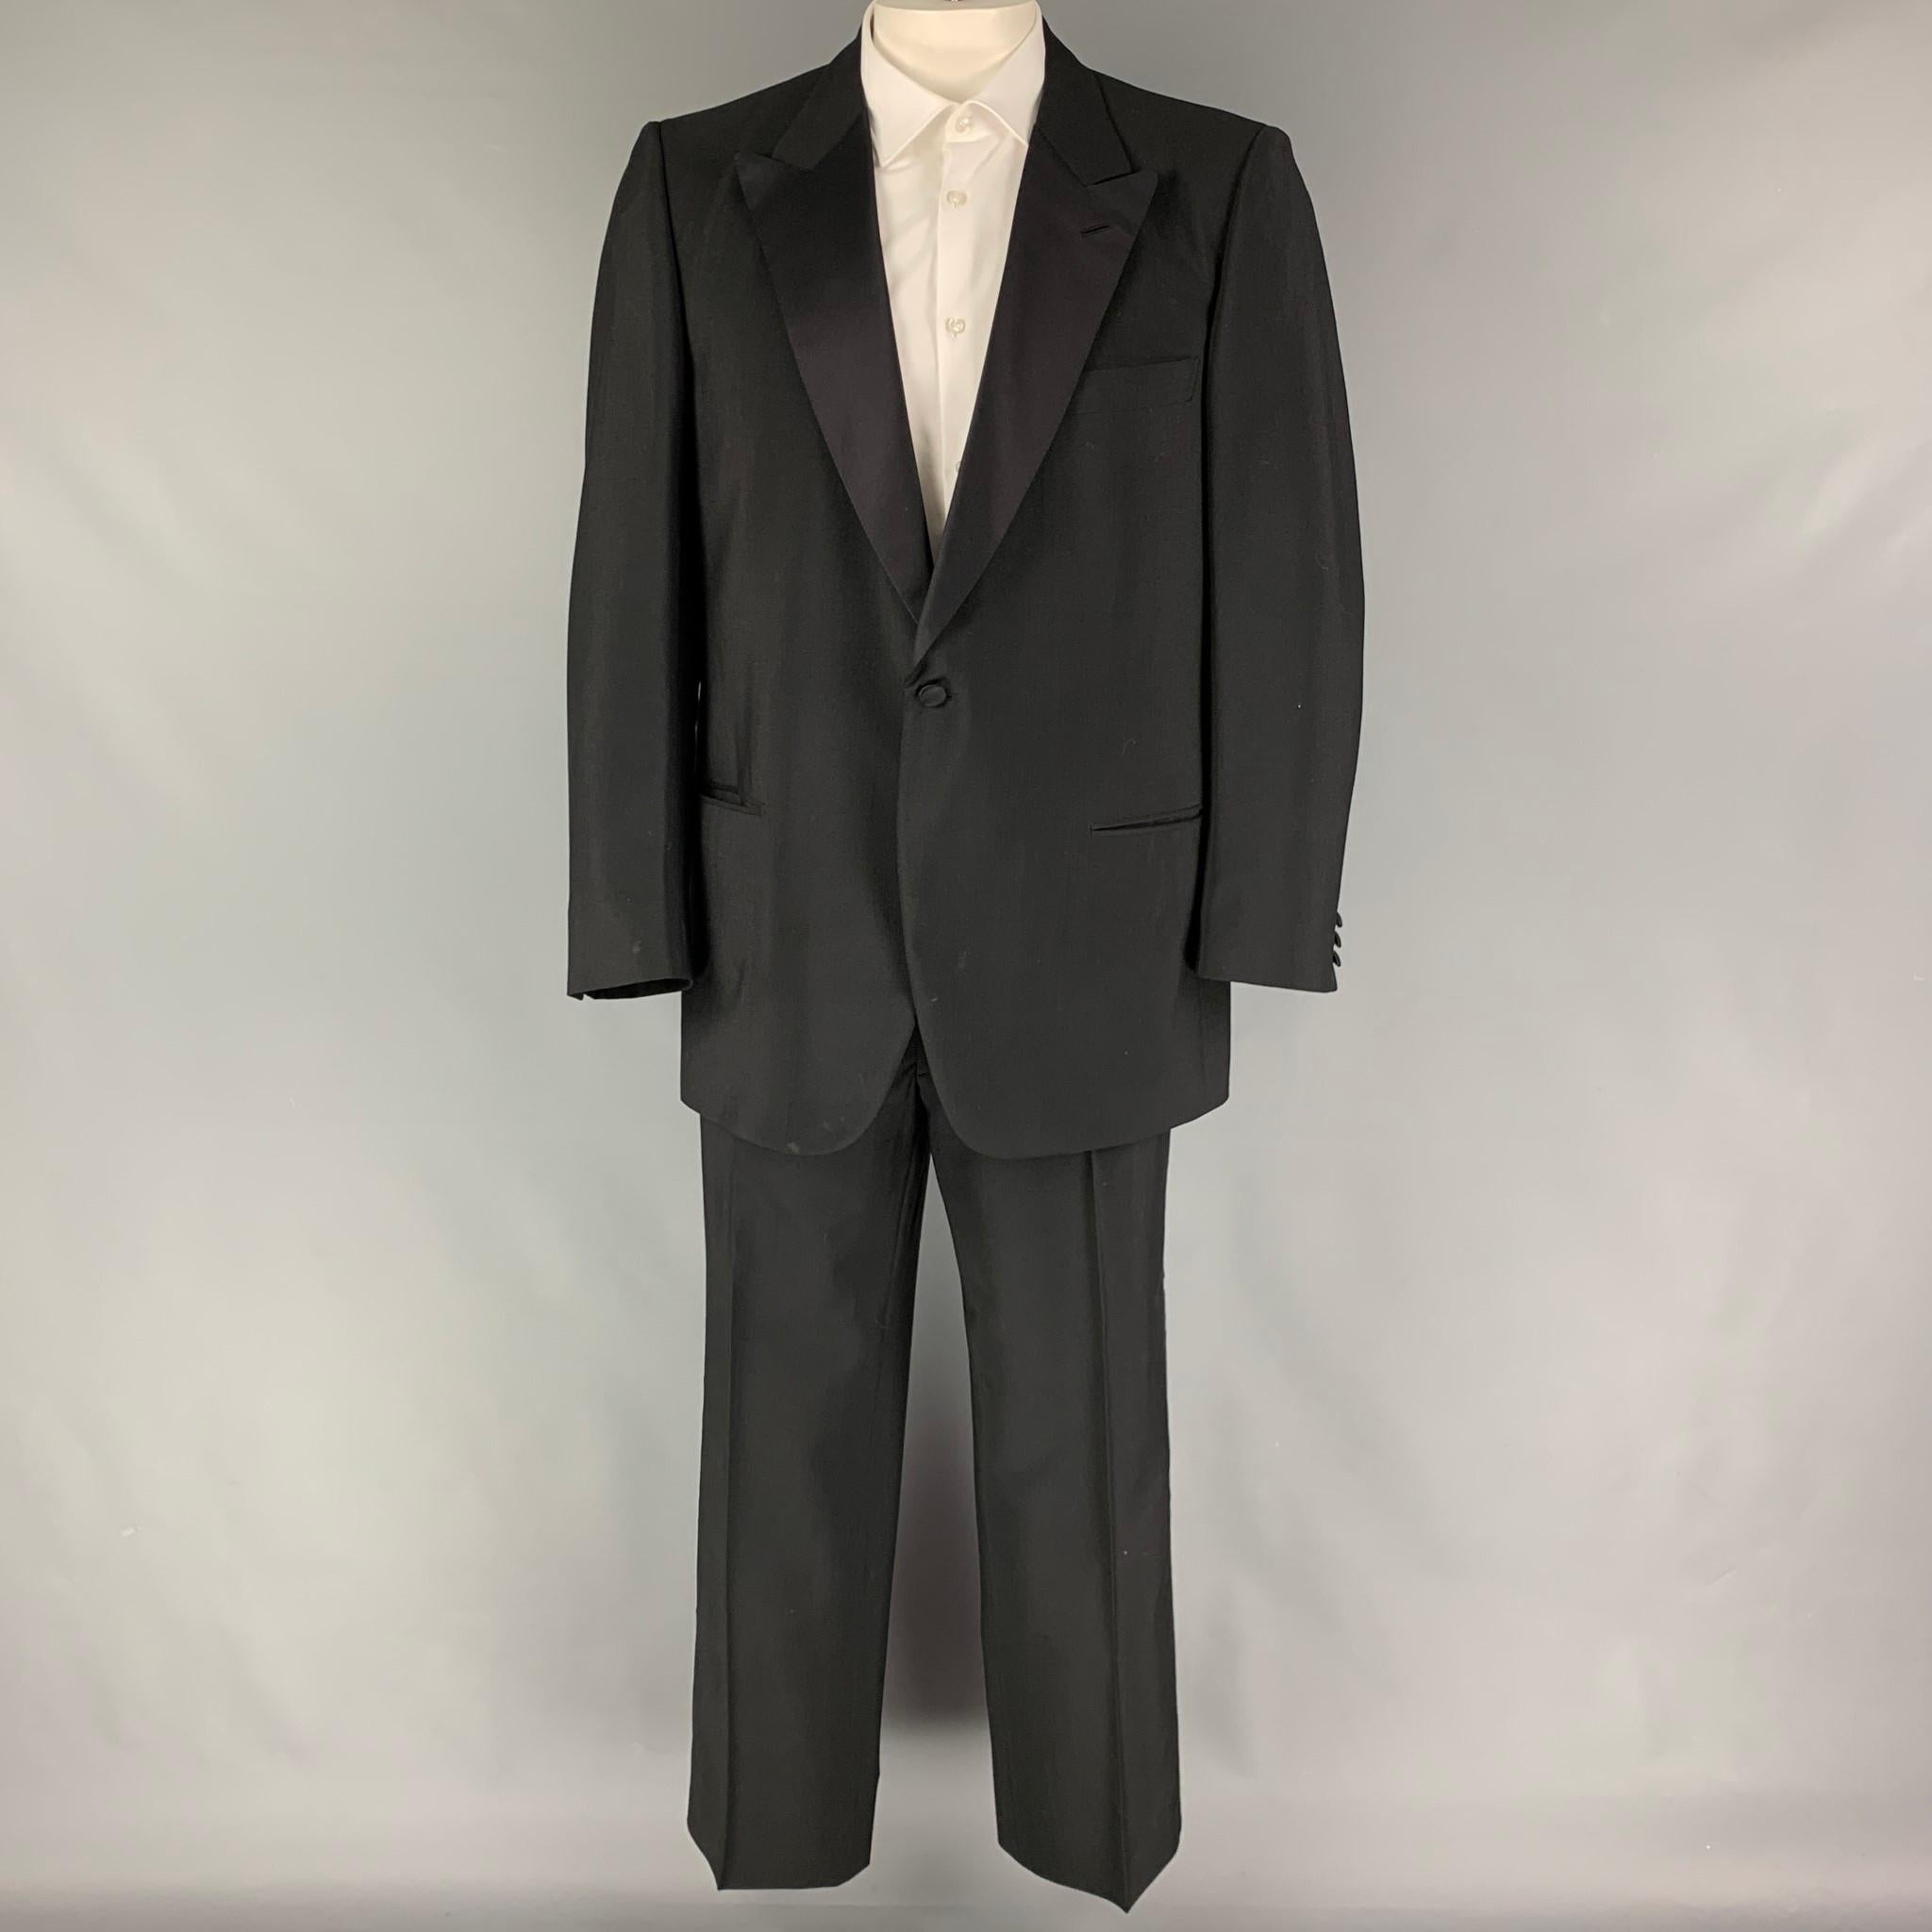 BRIONI for COURTOUE suit comes in a black wool / mohair with a full liner and includes a single breasted, single button sport coat with a peak lapel and matching flat front trousers. Includes suspenders. Made in Italy.

Very Good Pre-Owned